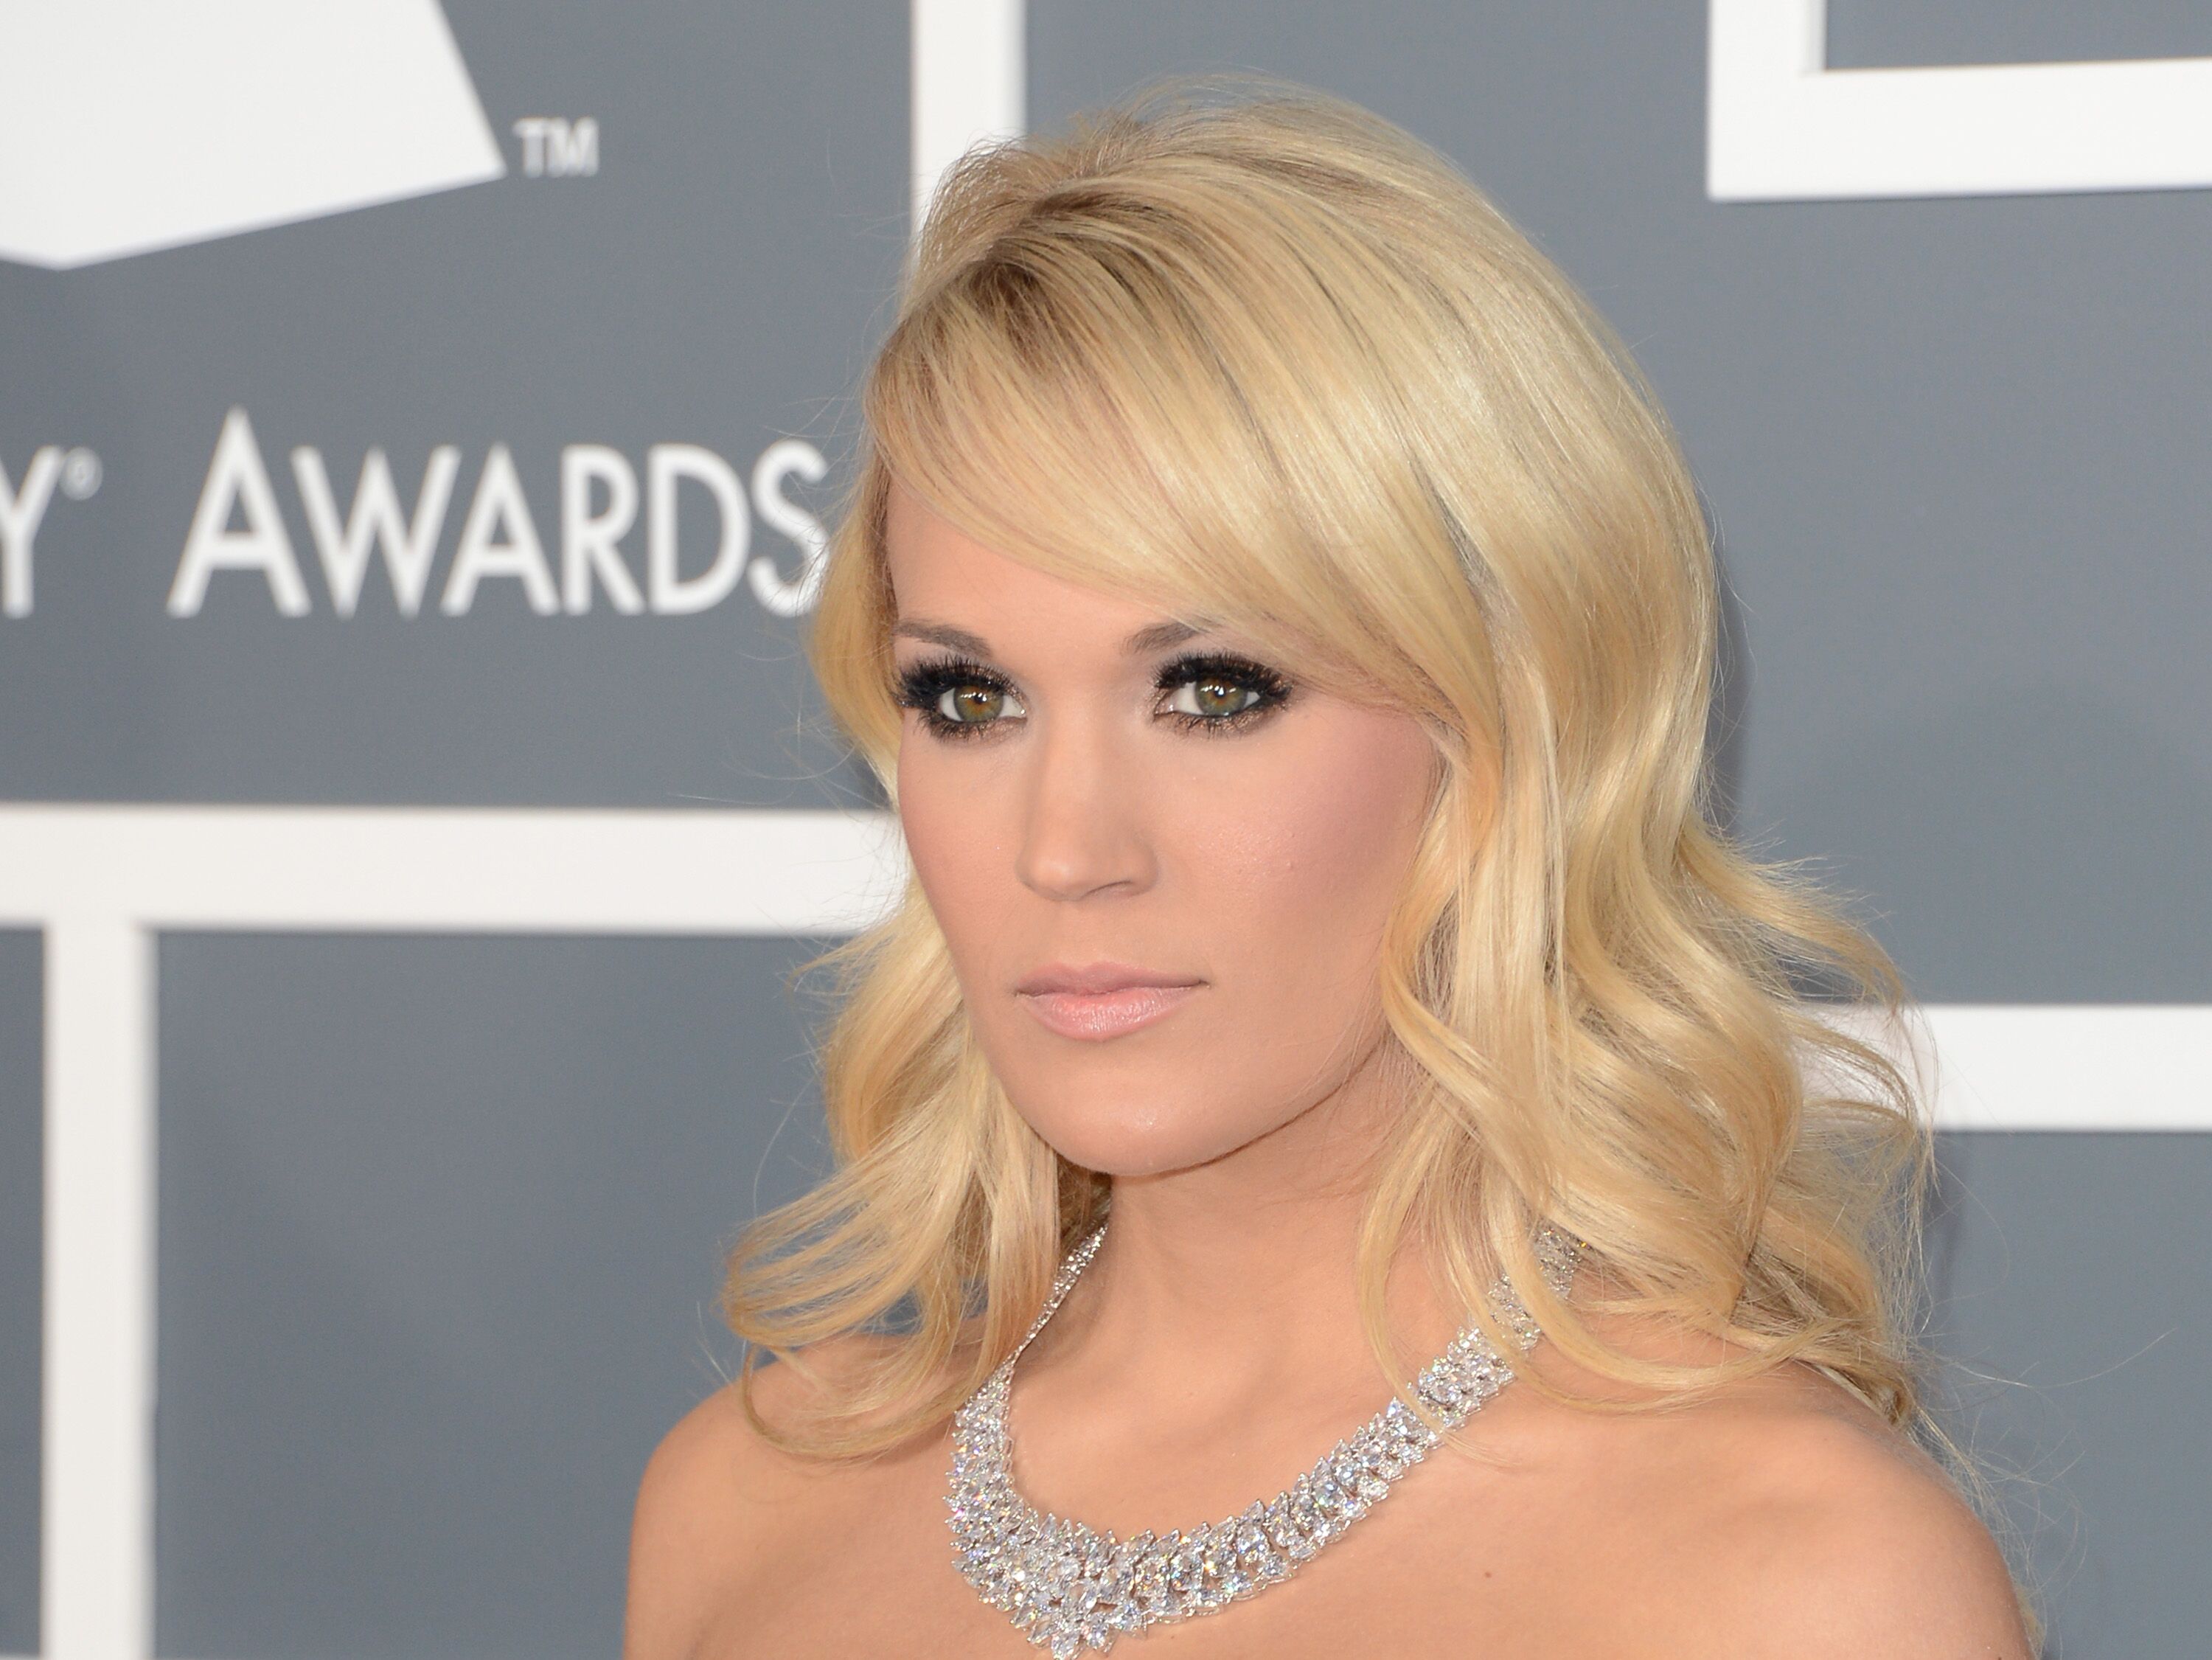  Carrie Underwood at the 55th Annual GRAMMY Awards in Los Angeles, California | Source: Getty Images